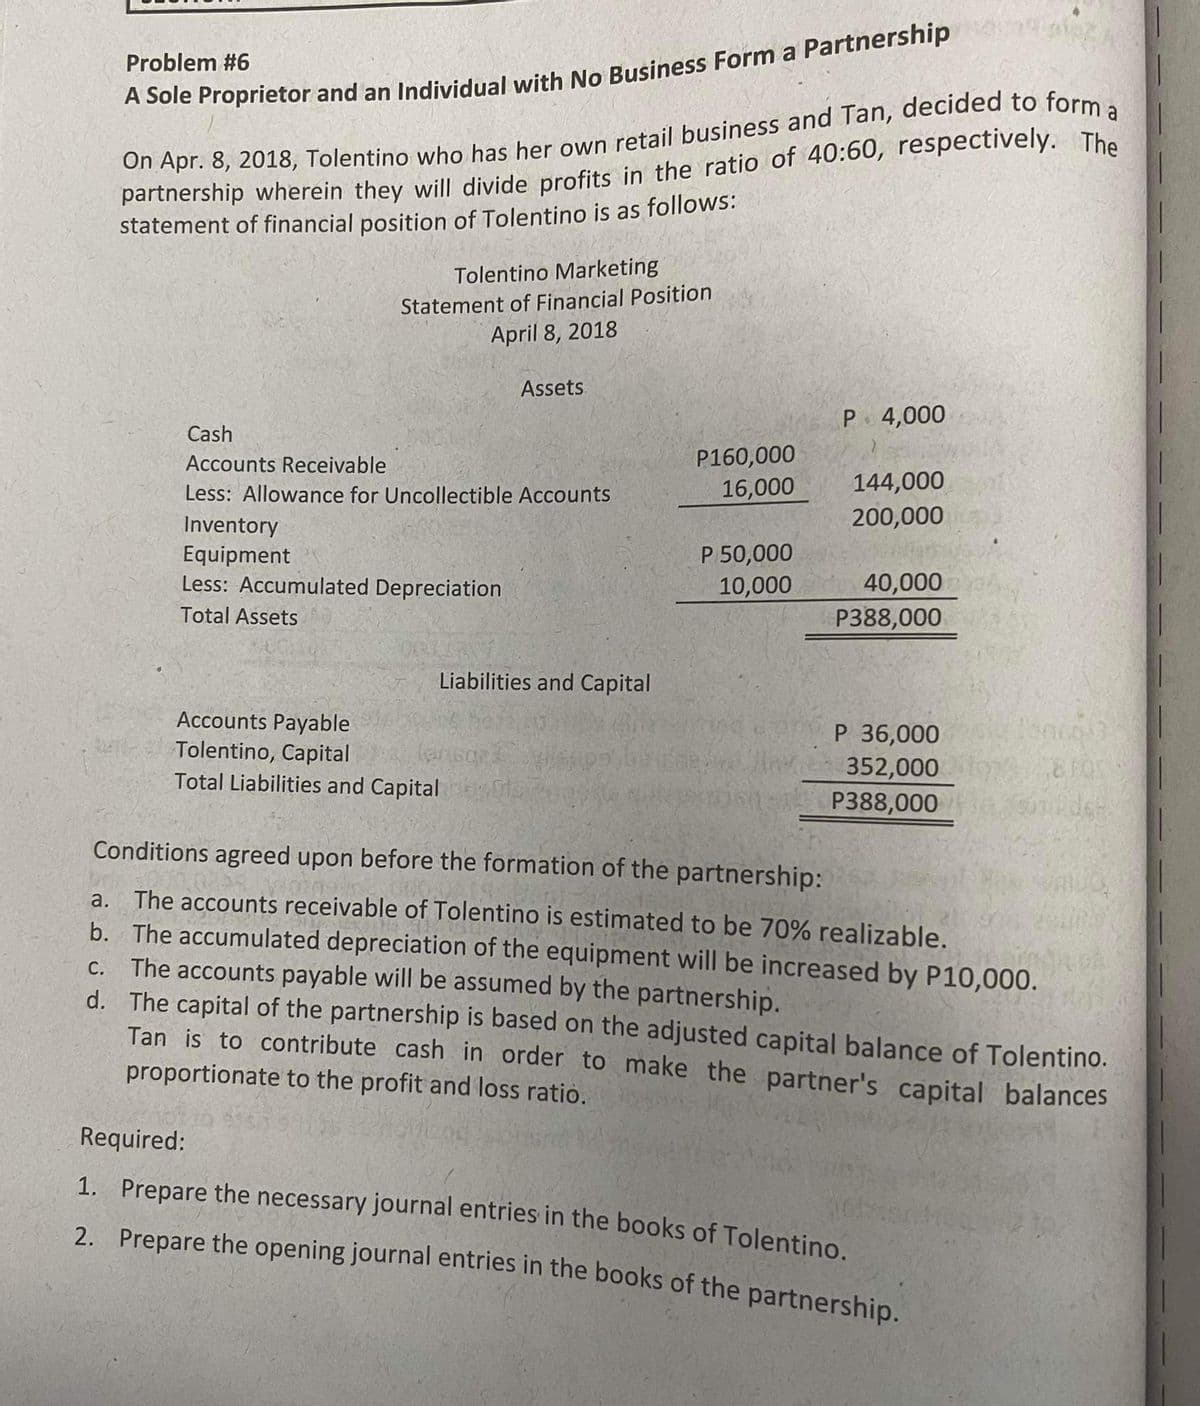 Problem #6
partnership wherein they will divide profits in the ratio of 40:60, respectively. The
statement of financial position of Tolentino is as follows:
Tolentino Marketing
Statement of Financial Position
April 8, 2018
Assets
P 4,000
Cash
P160,000
16,000
Accounts Receivable
144,000
Less: Allowance for Uncollectible Accounts
200,000
Inventory
Equipment
Less: Accumulated Depreciation
P 50,000
10,000
40,000
P388,000
Total Assets
Liabilities and Capital
Accounts Payable
Tolentino, Capital
Total Liabilities and Capital evae
P 36,000
352,000
P388,000
Conditions agreed upon before the formation of the partnership:
The accounts receivable of Tolentino is estimated to be 70% realizable.
b. The accumulated depreciation of the equipment will be increased by P10,000.
c. The accounts payable will be assumed by the partnership.
d. The capital of the partnership is based on the adjusted capital balance of Tolentino.
Tan is to contribute cash in order to make the partner's capital balances
proportionate to the profit and loss ratio.
а.
Required:
1. Prepare the necessary journal entries in the books of Tolentino.
2. Prepare the opening journal entries in the books of the partnership.
